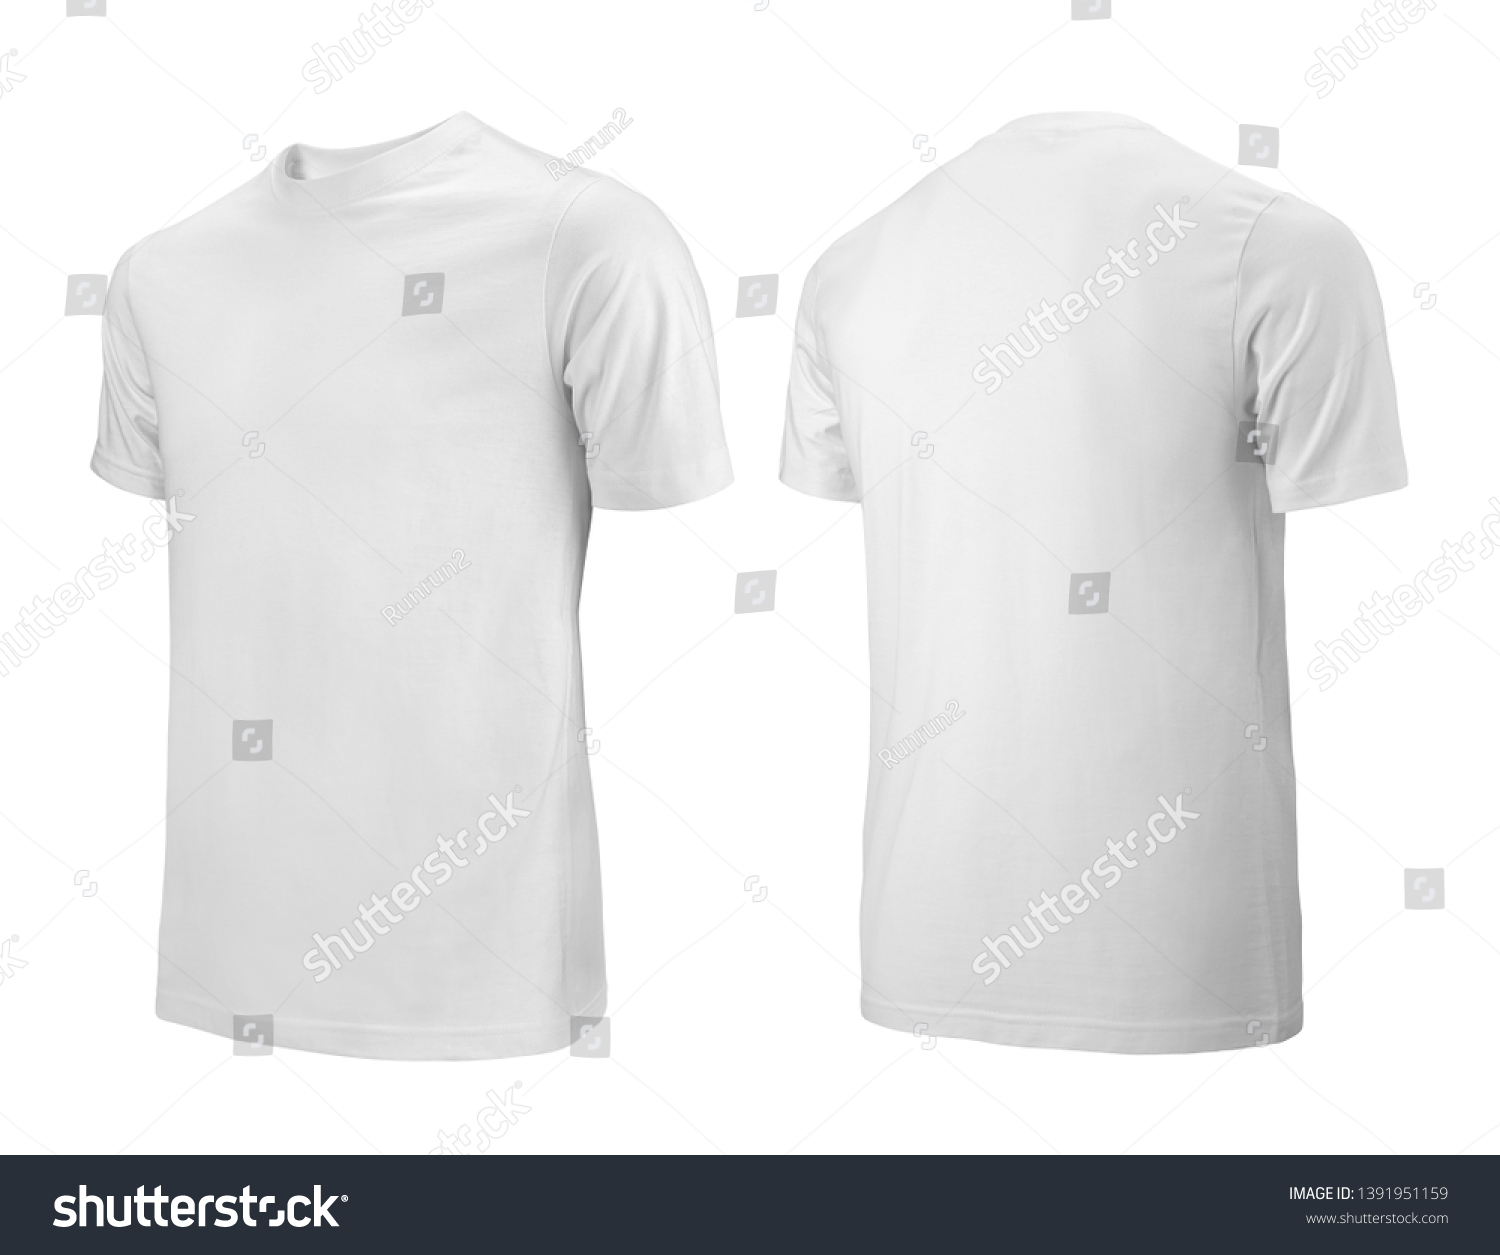 White Tshirts Front Back Side View Stock Photo 1391951159 | Shutterstock